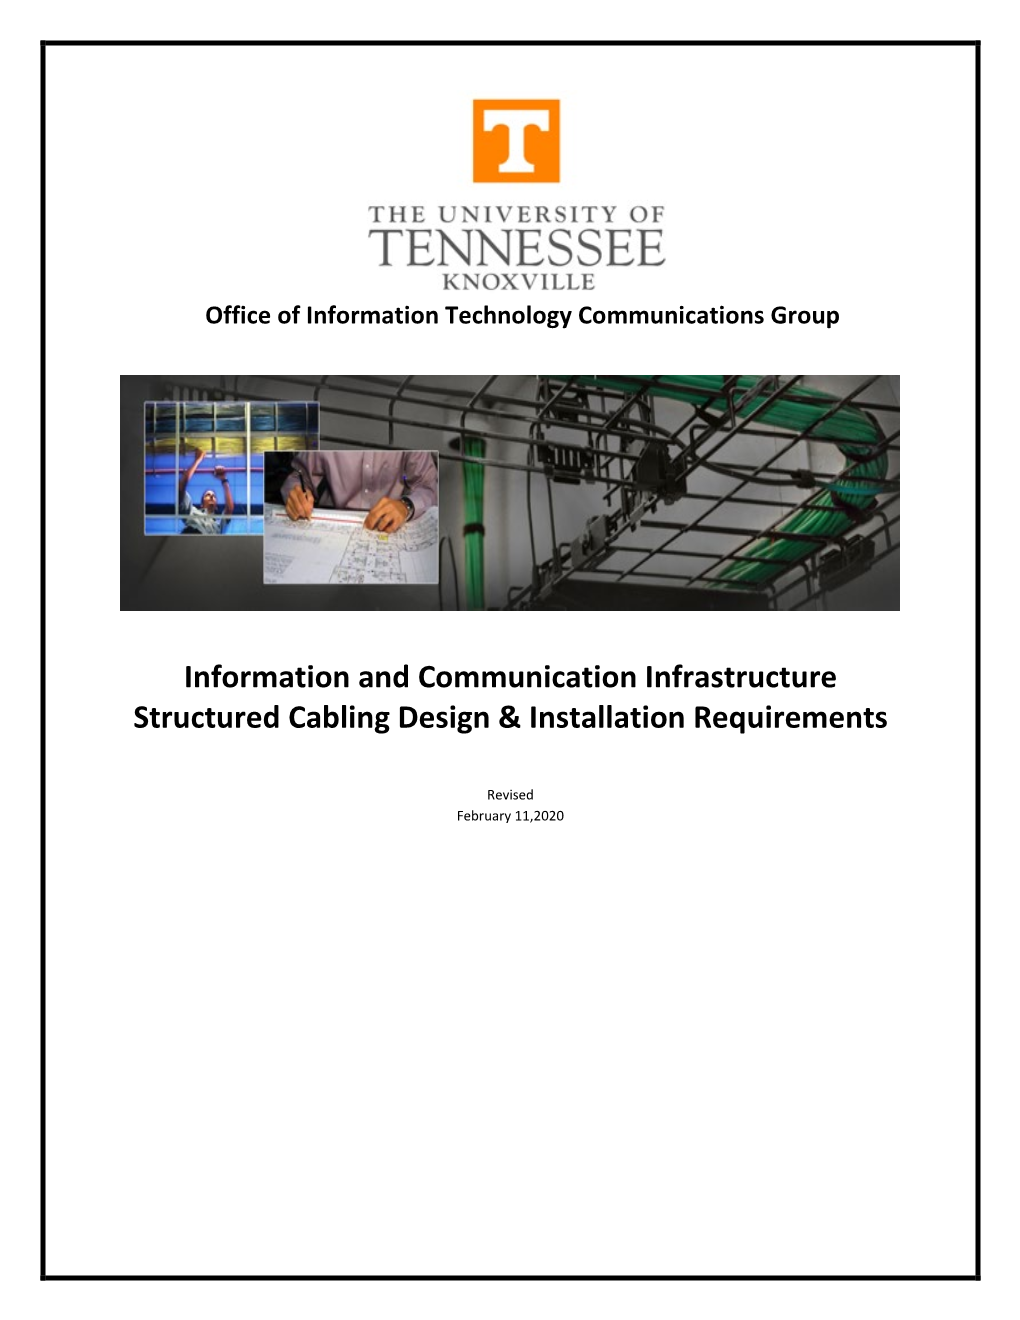 Information and Communication Infrastructure Structured Cabling Design & Installation Requirements